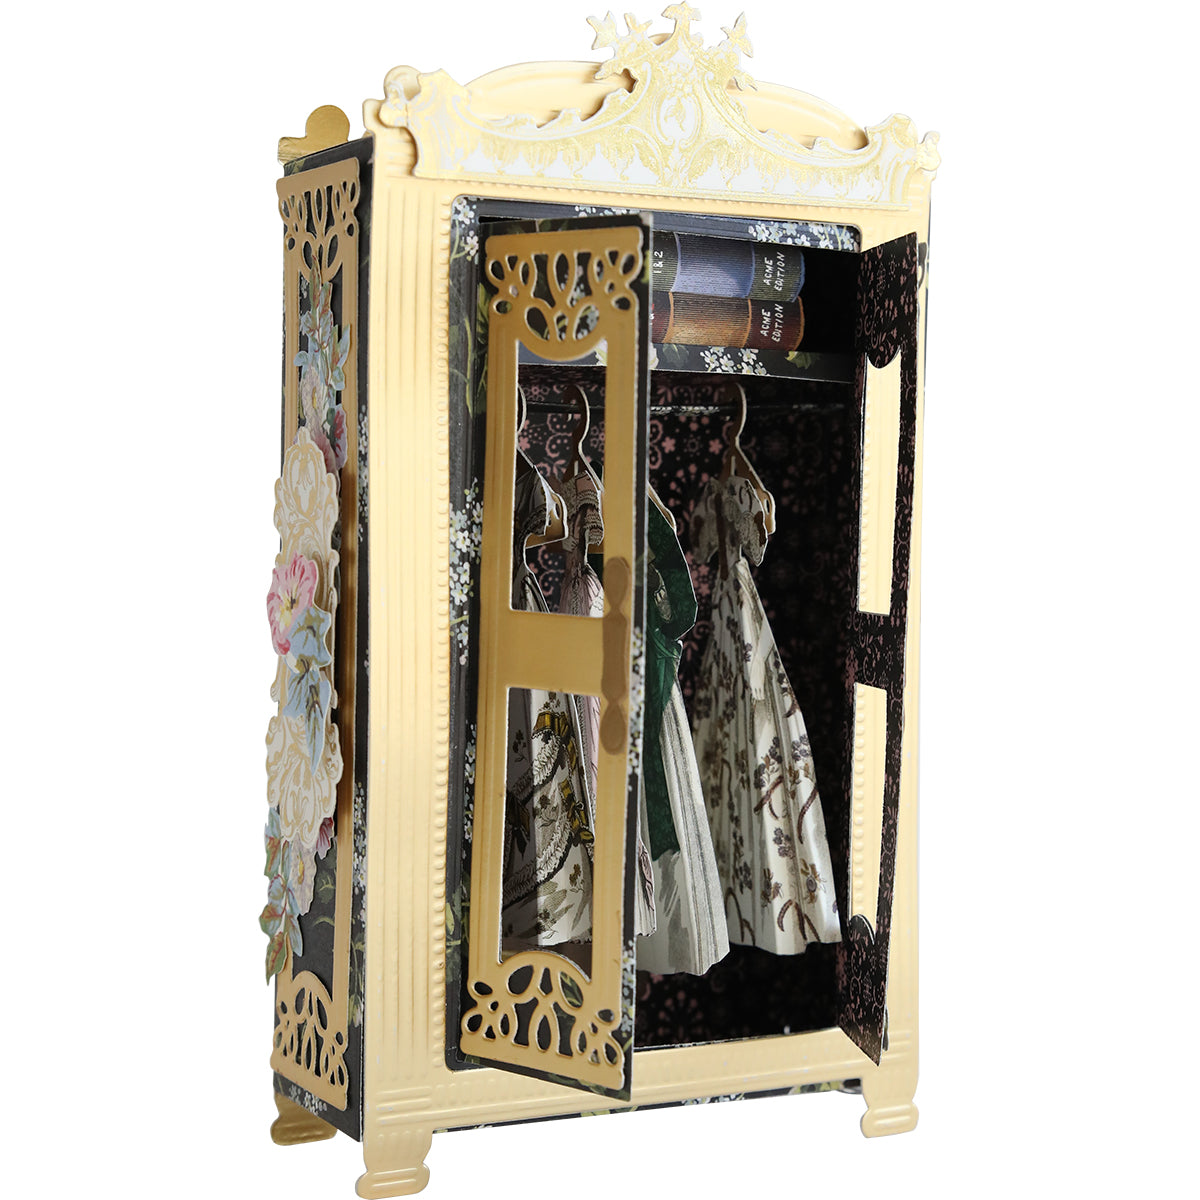 An Antique Armoire Dies with a dress in it, perfect for crafting projects or custom cards.